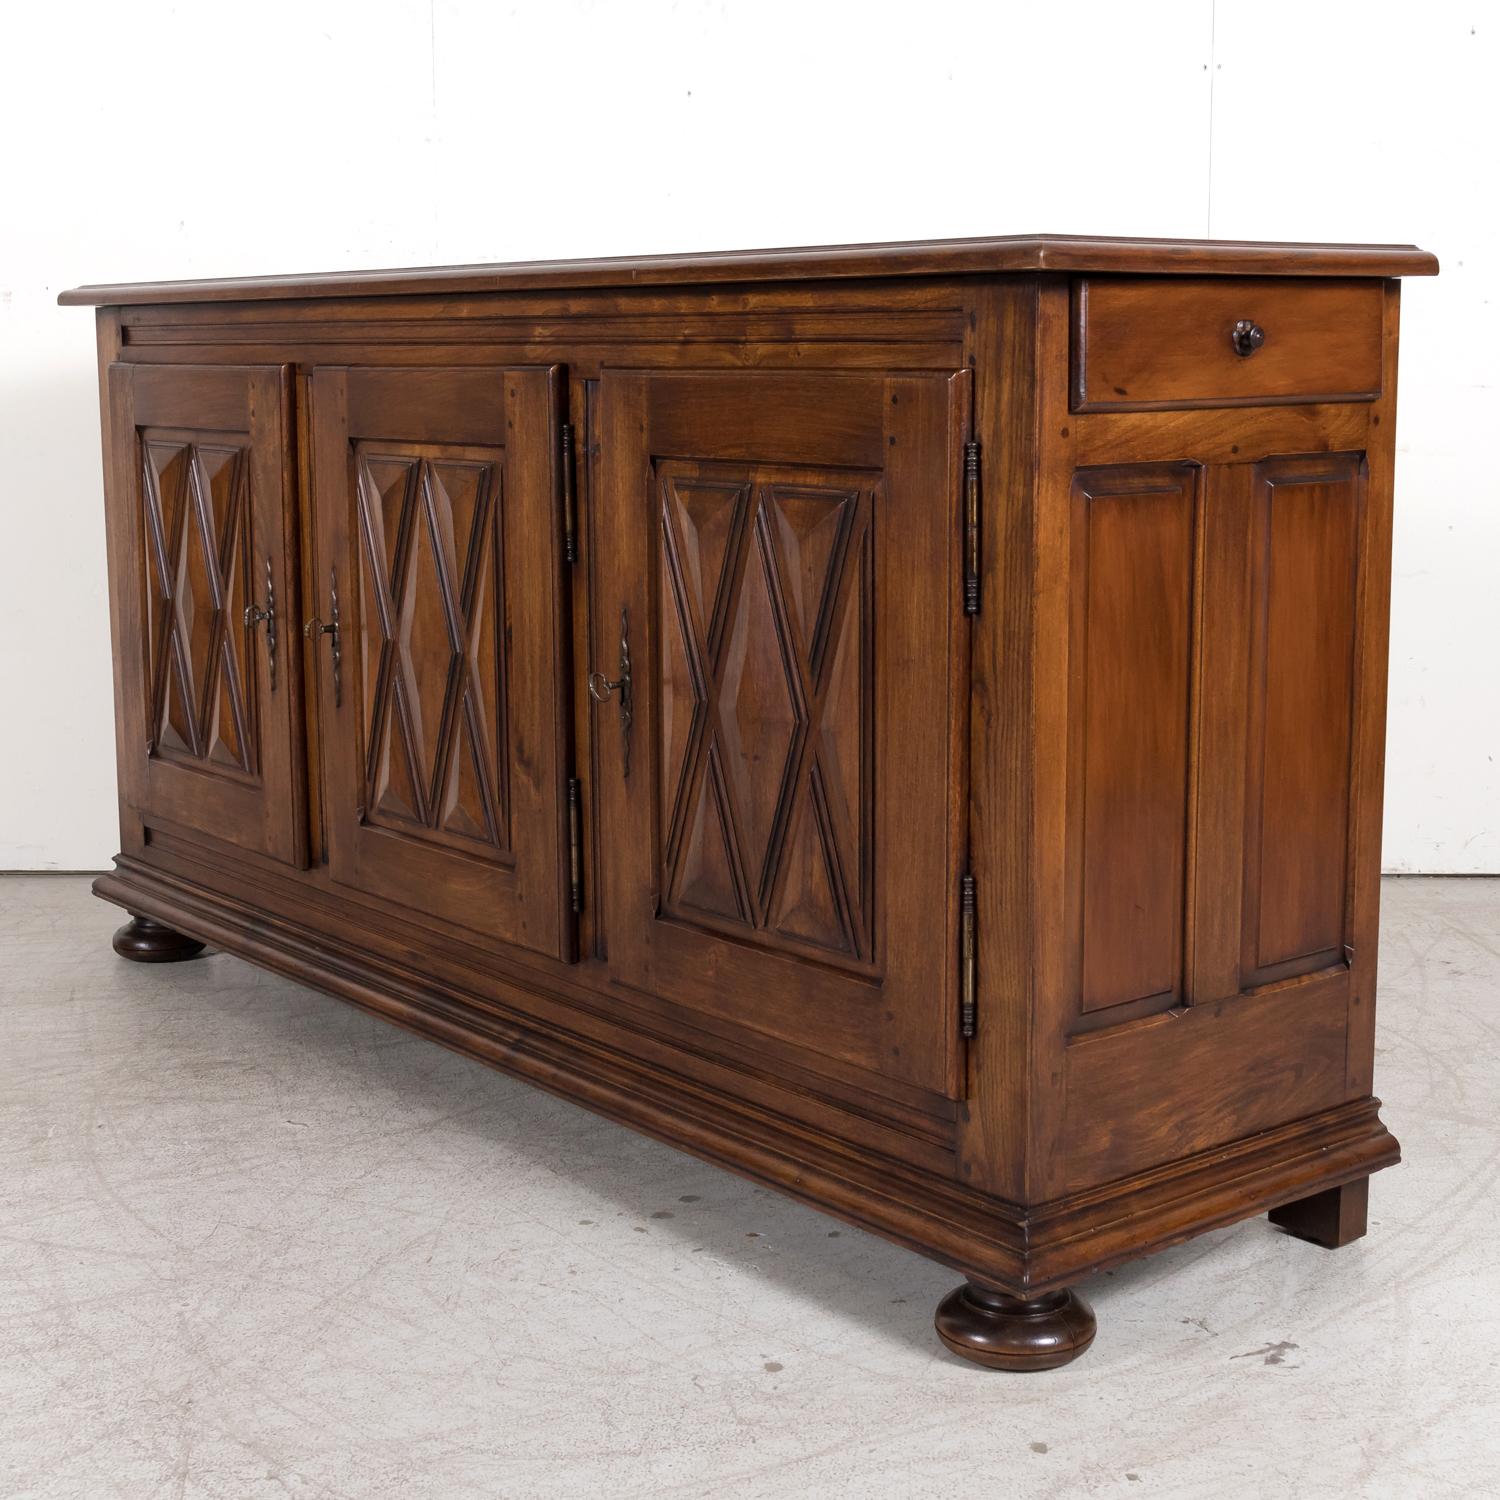 An antique French Country Louis XIII style carved enfilade buffet handcrafted of solid chestnut in Normandy, circa 1920s, having an inset rectangular plank top over three doors with raised diamante point decoration that open to reveal a single